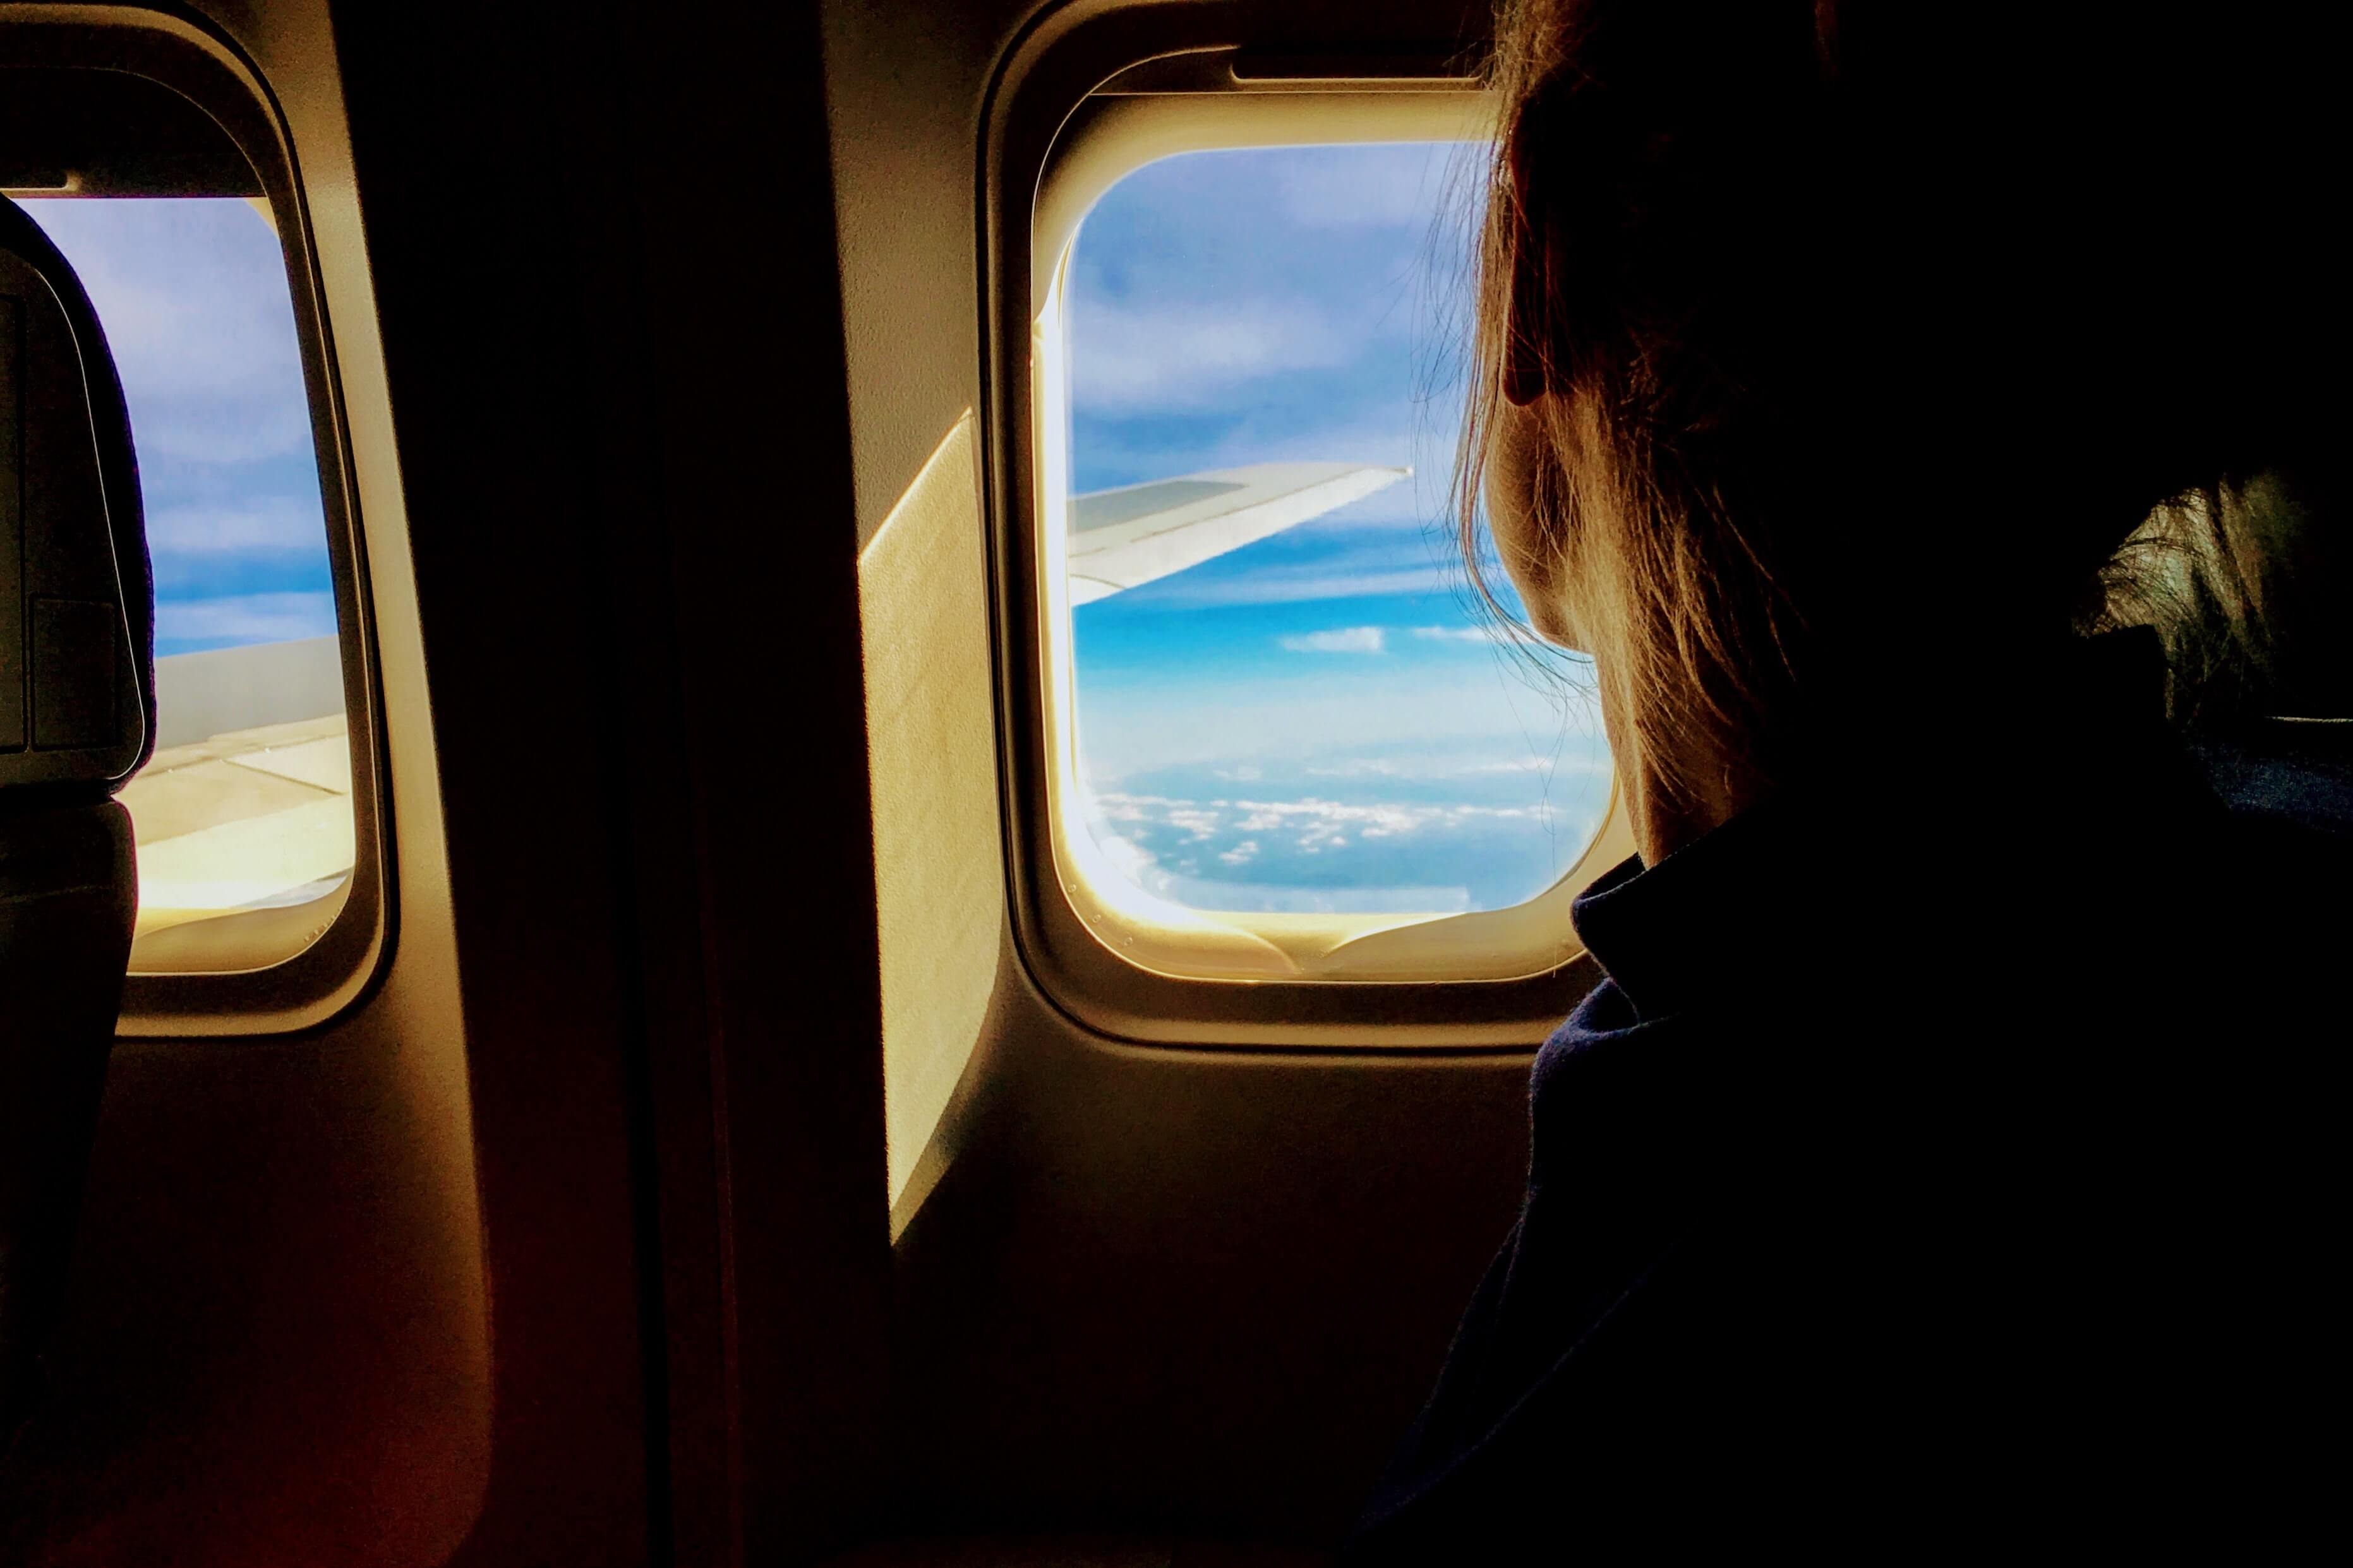 Having a flight companion means more than just company